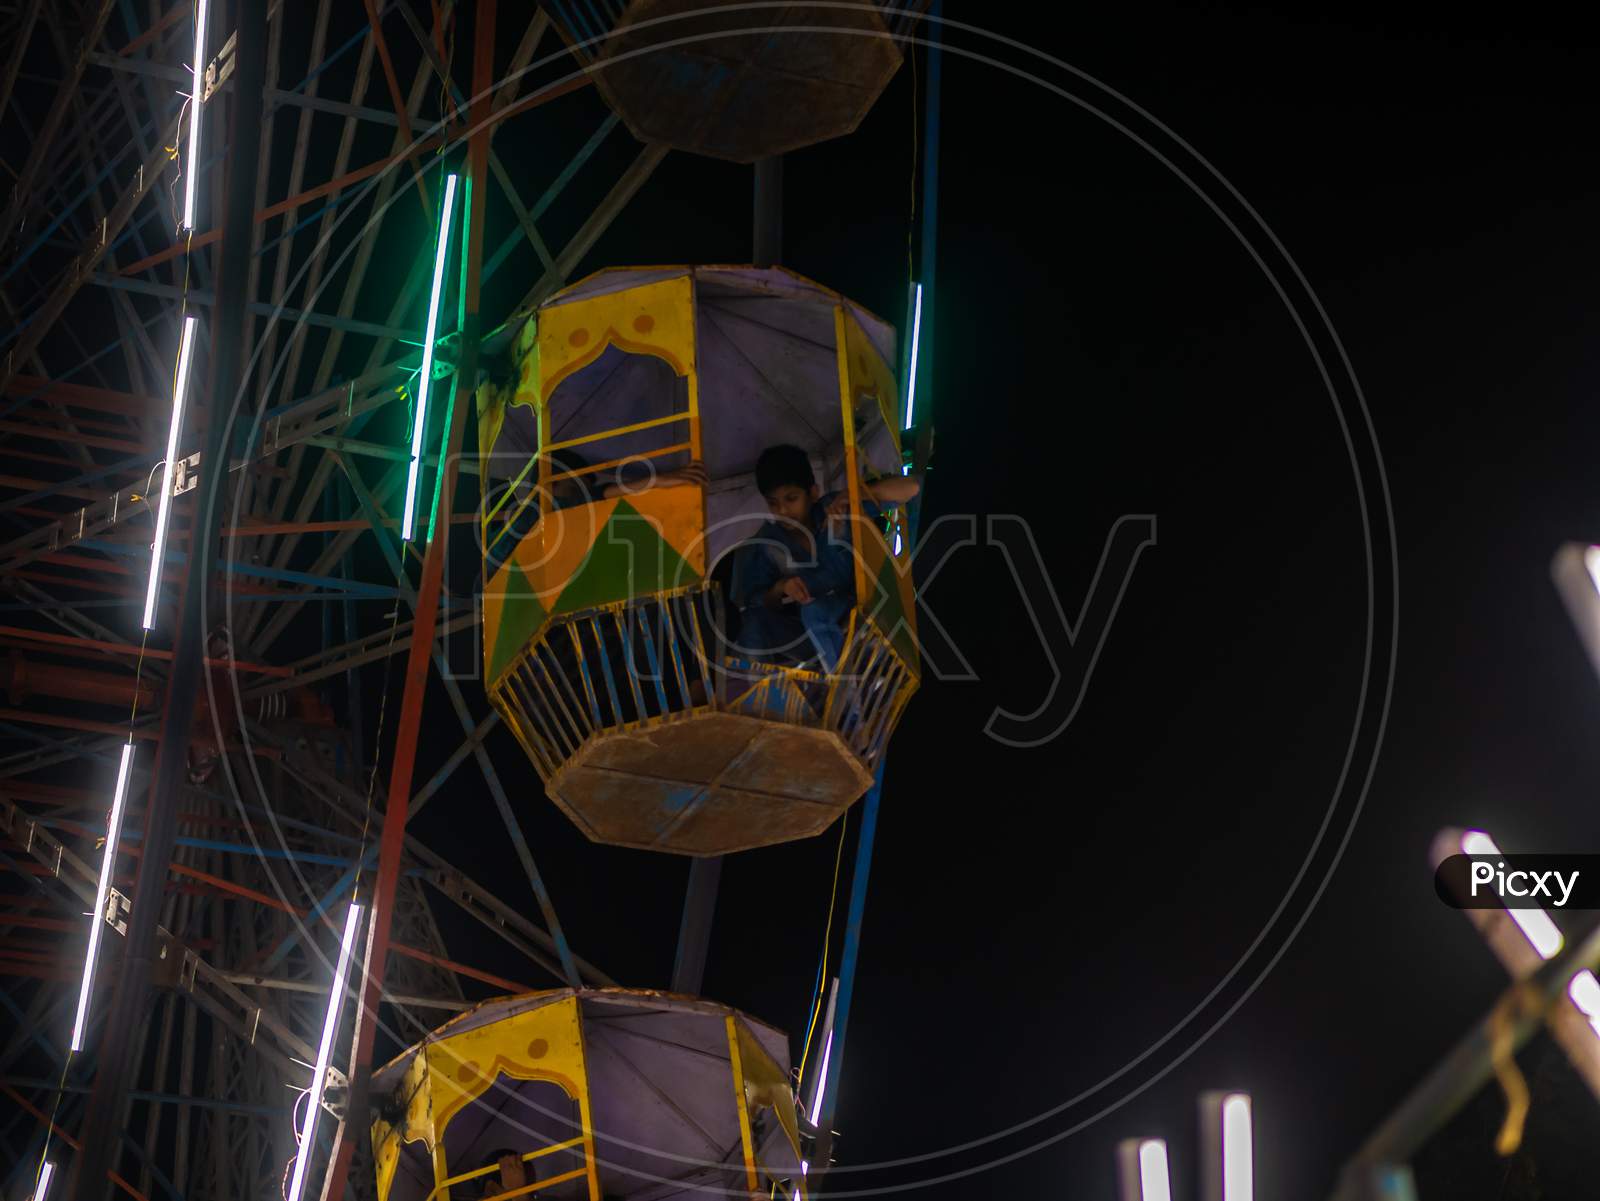 Unidentified Kid Watching From Colourful Giant Wheel At Amusement Park Illuminated At Night In India